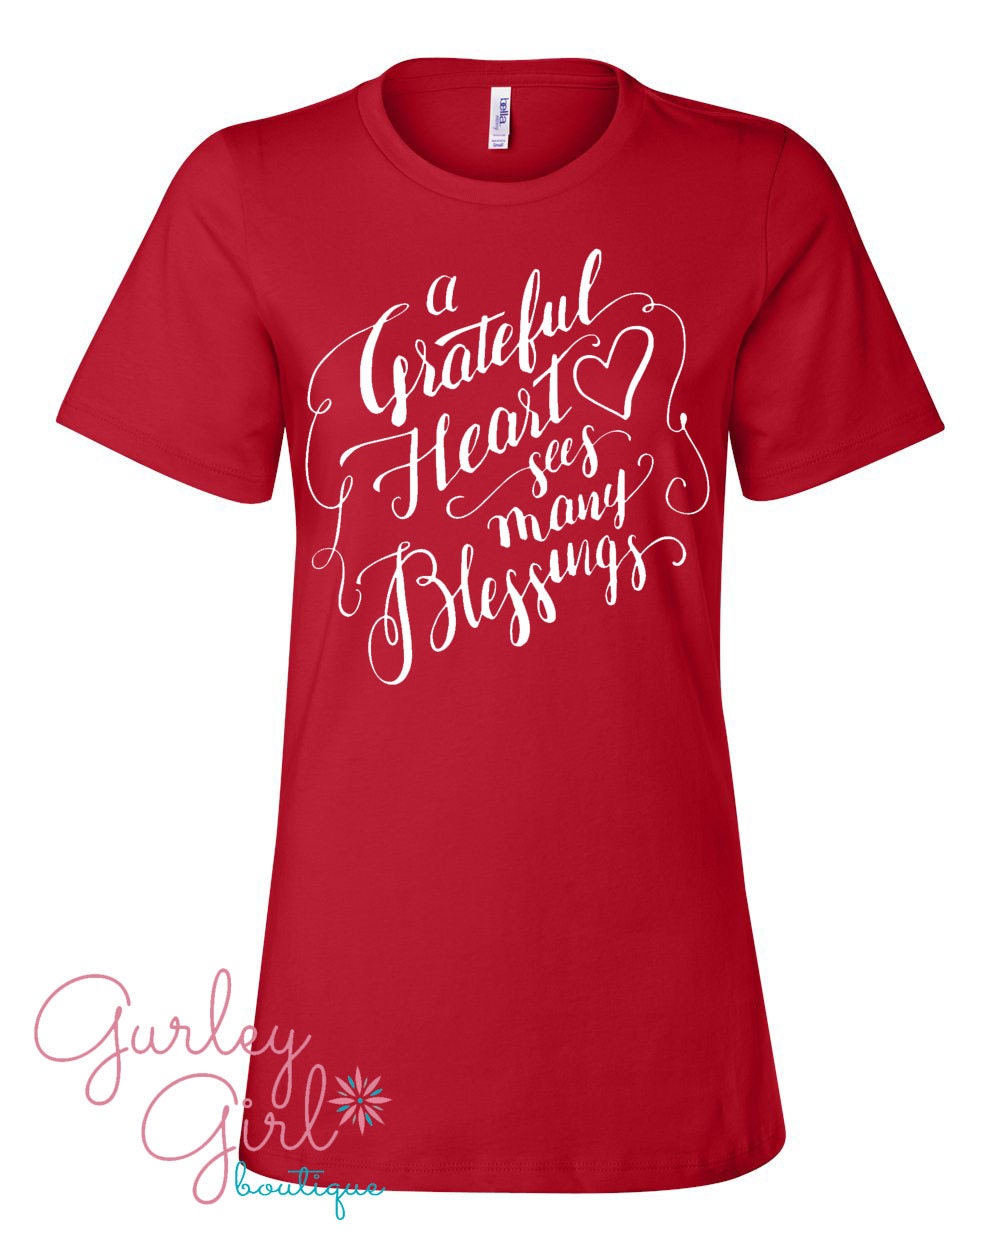 Women's Valentine Graphic Tee A Grateful Heart Sees Many Blessings